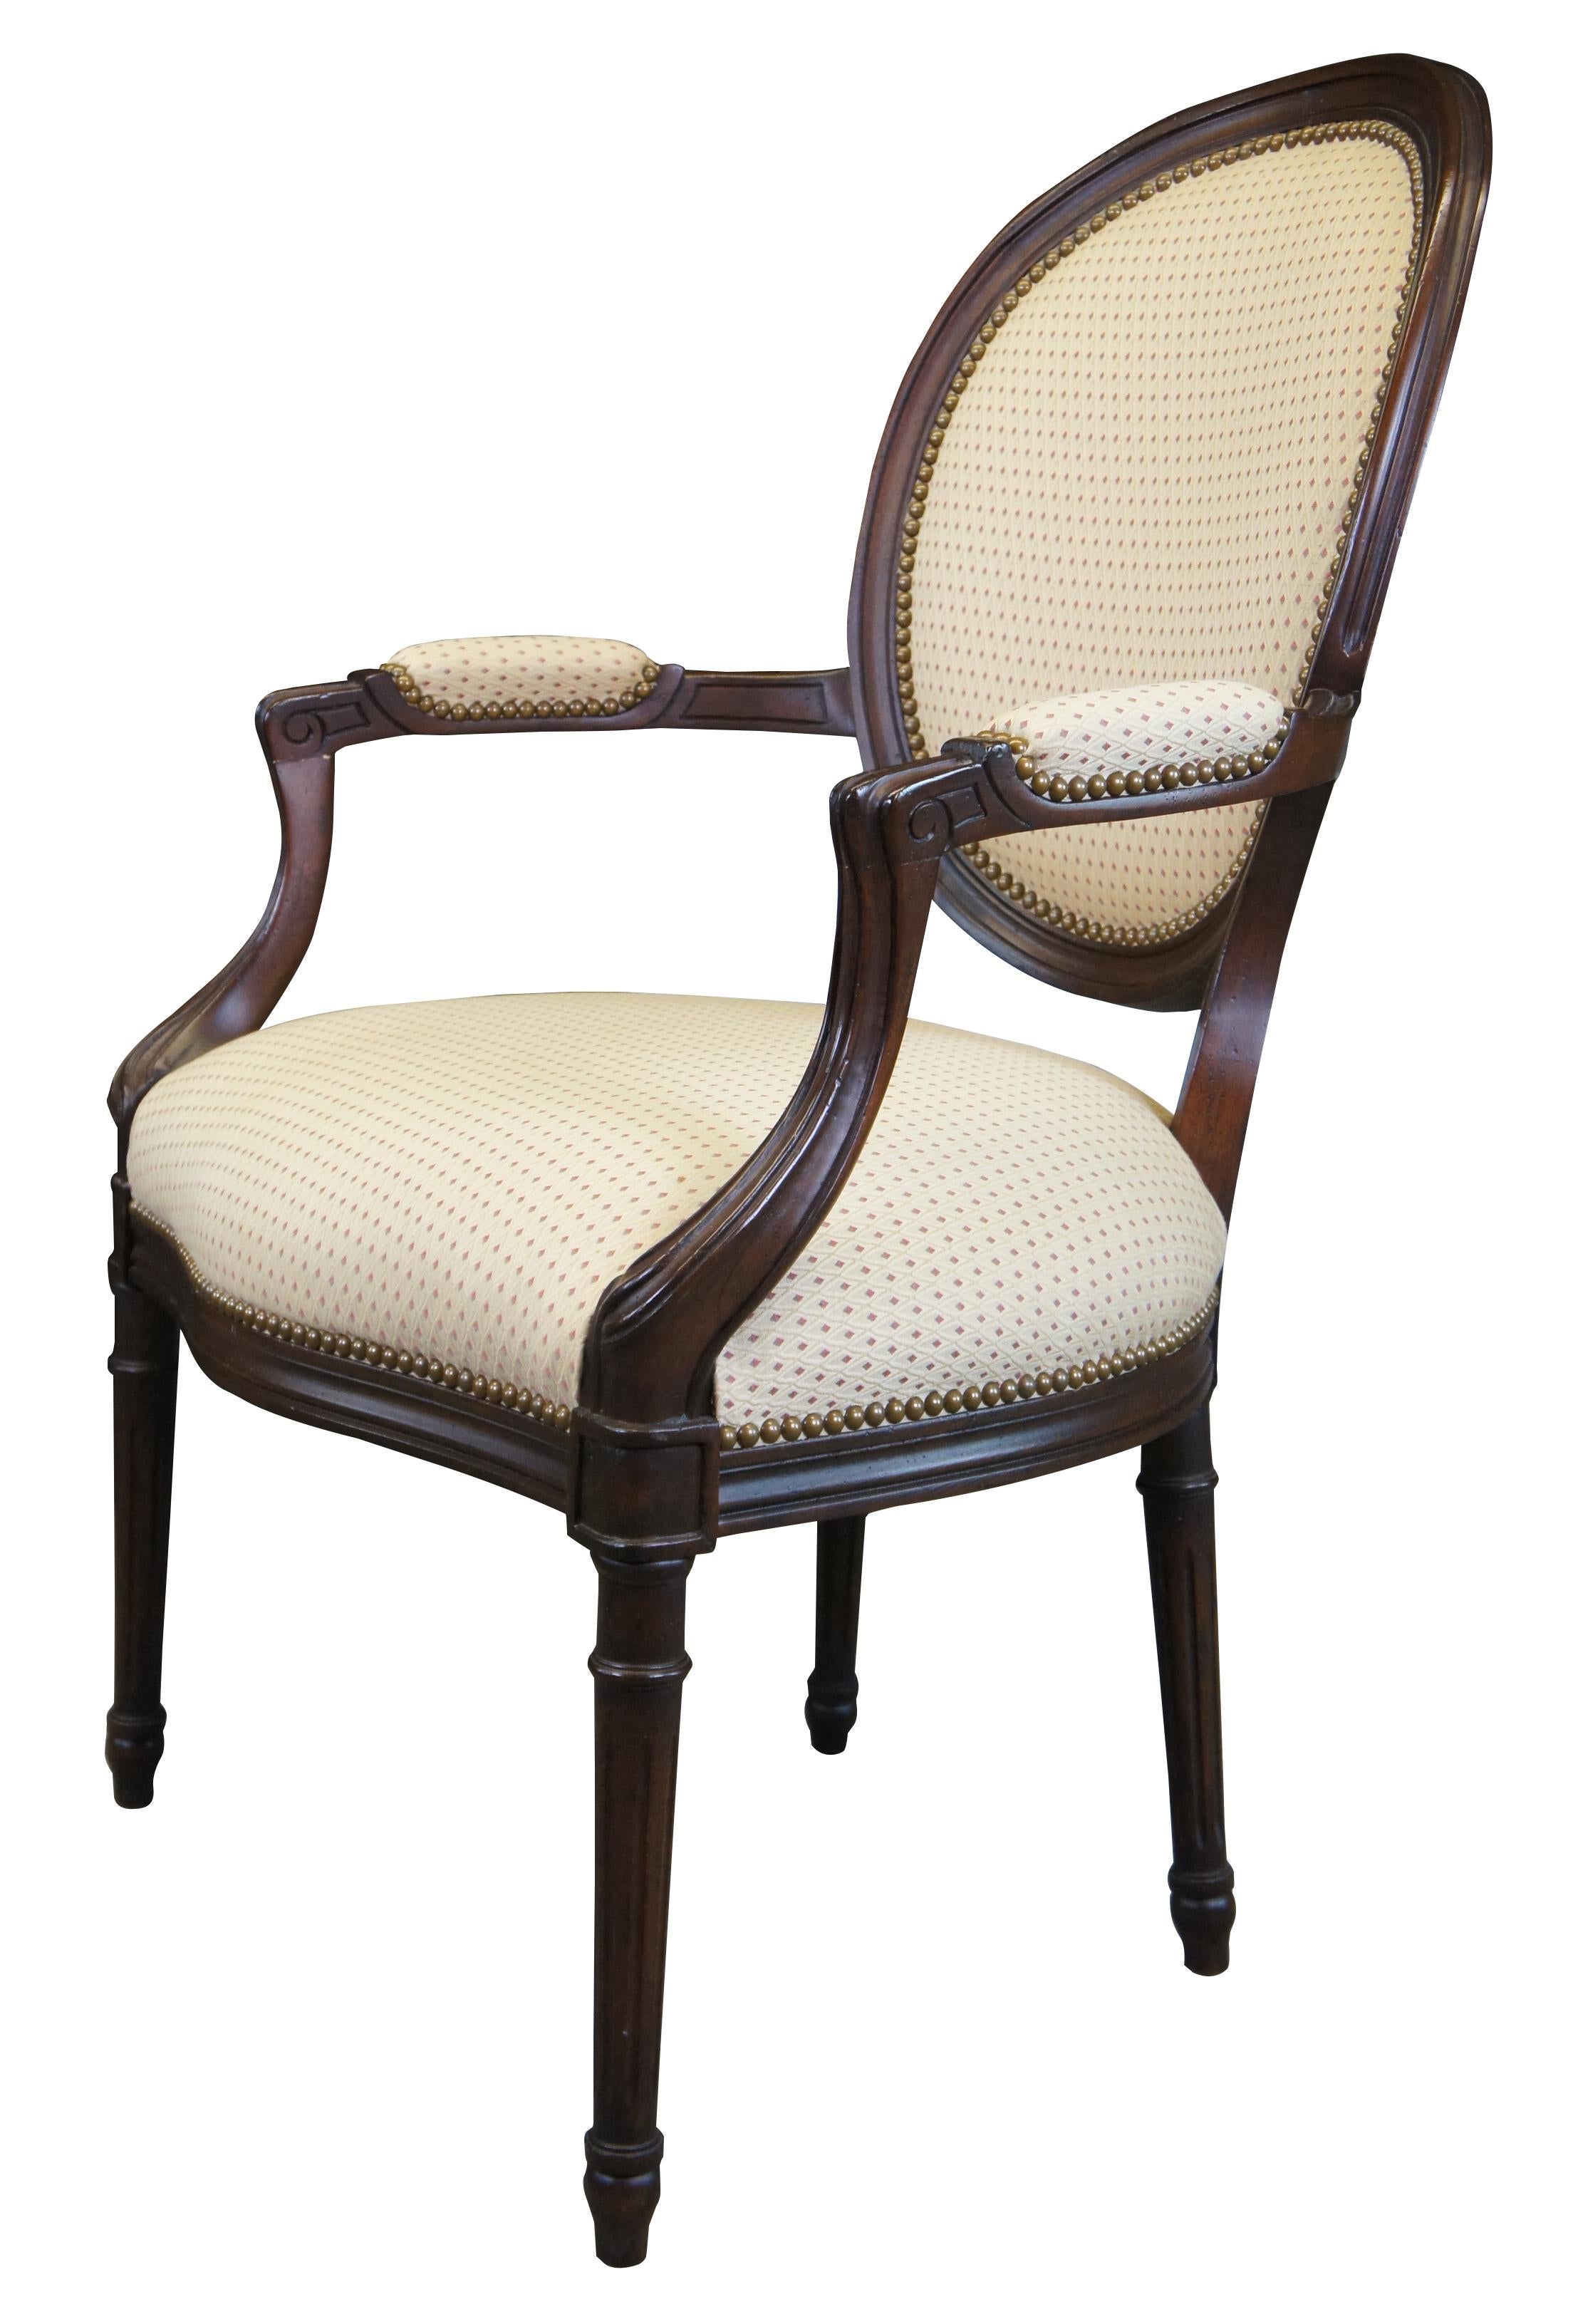 Neoclassical Revival 2 French Neoclassical George III Open Fauteuil Balloon Back Nailhead Arm Chairs 